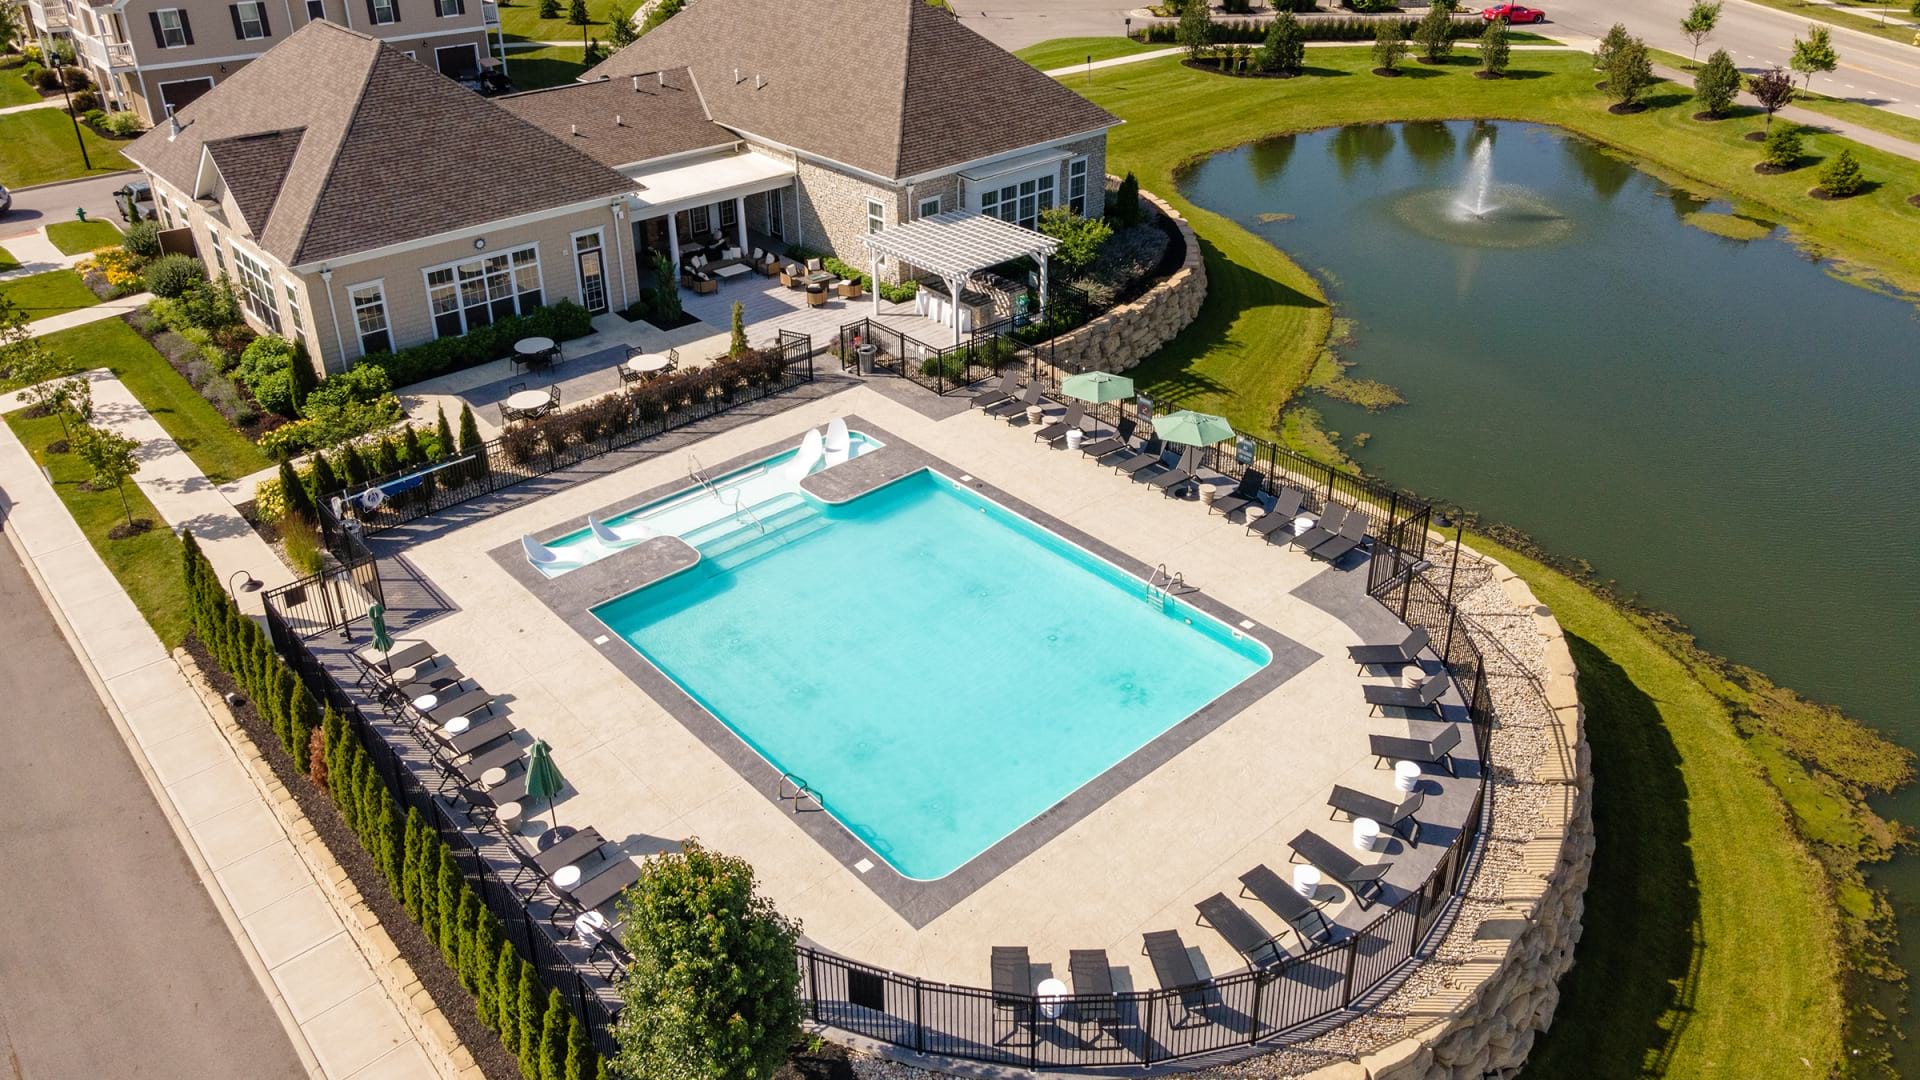 Aerial View of The Pool And Community Lake at Our Sunbury Apartments For Rent